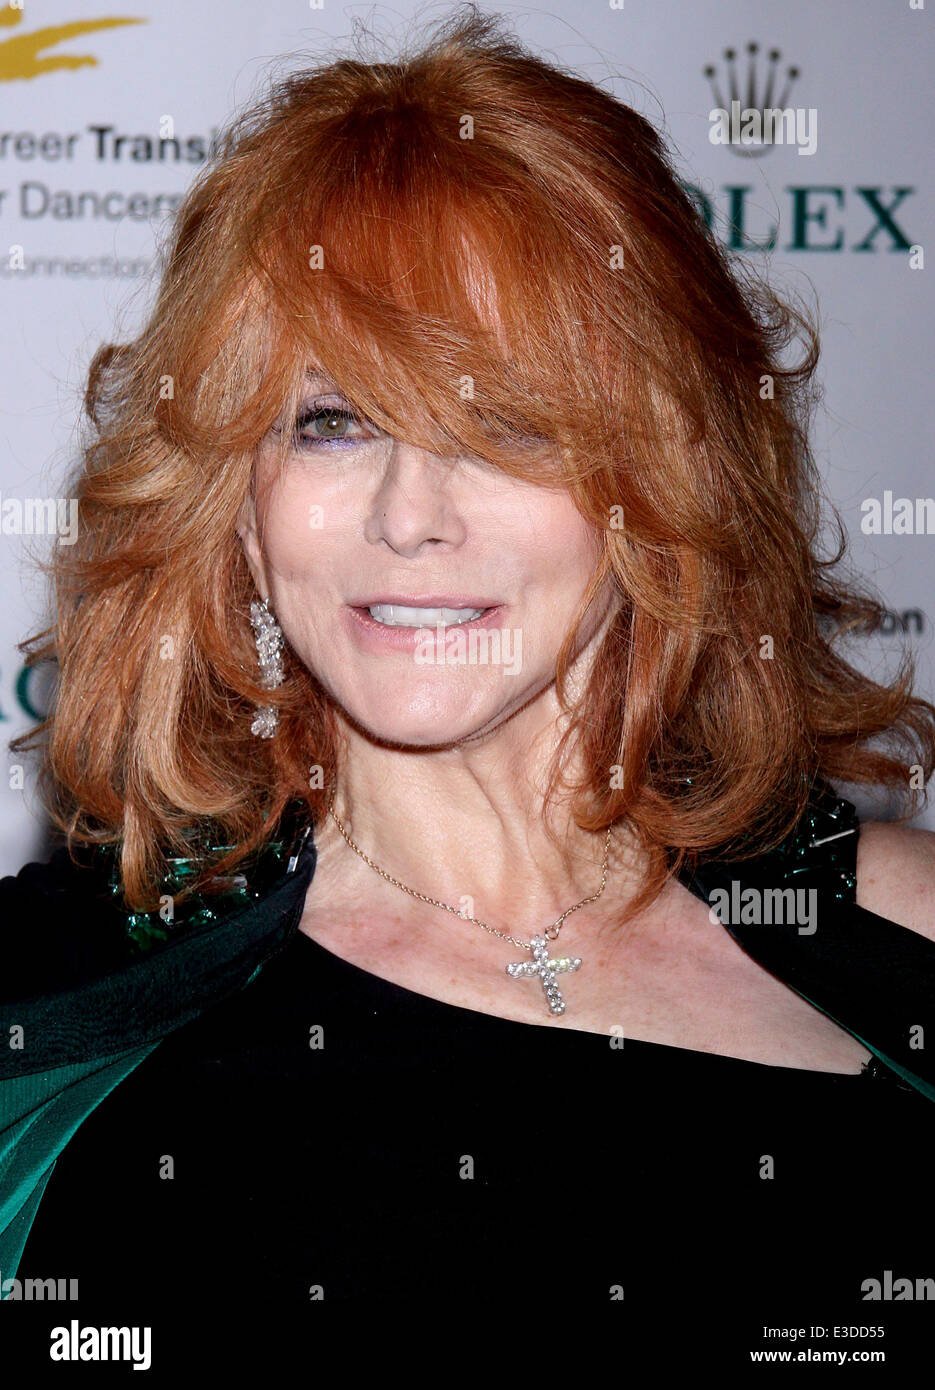 Career Transition For Dancers 28th Anniversary Jubilee Dinner, held at the New York Hilton Midtown Hotel-Arrivals.  Featuring: Ann-Margret Where: New York, NY, United States When: 08 Oct 2013 Stock Photo